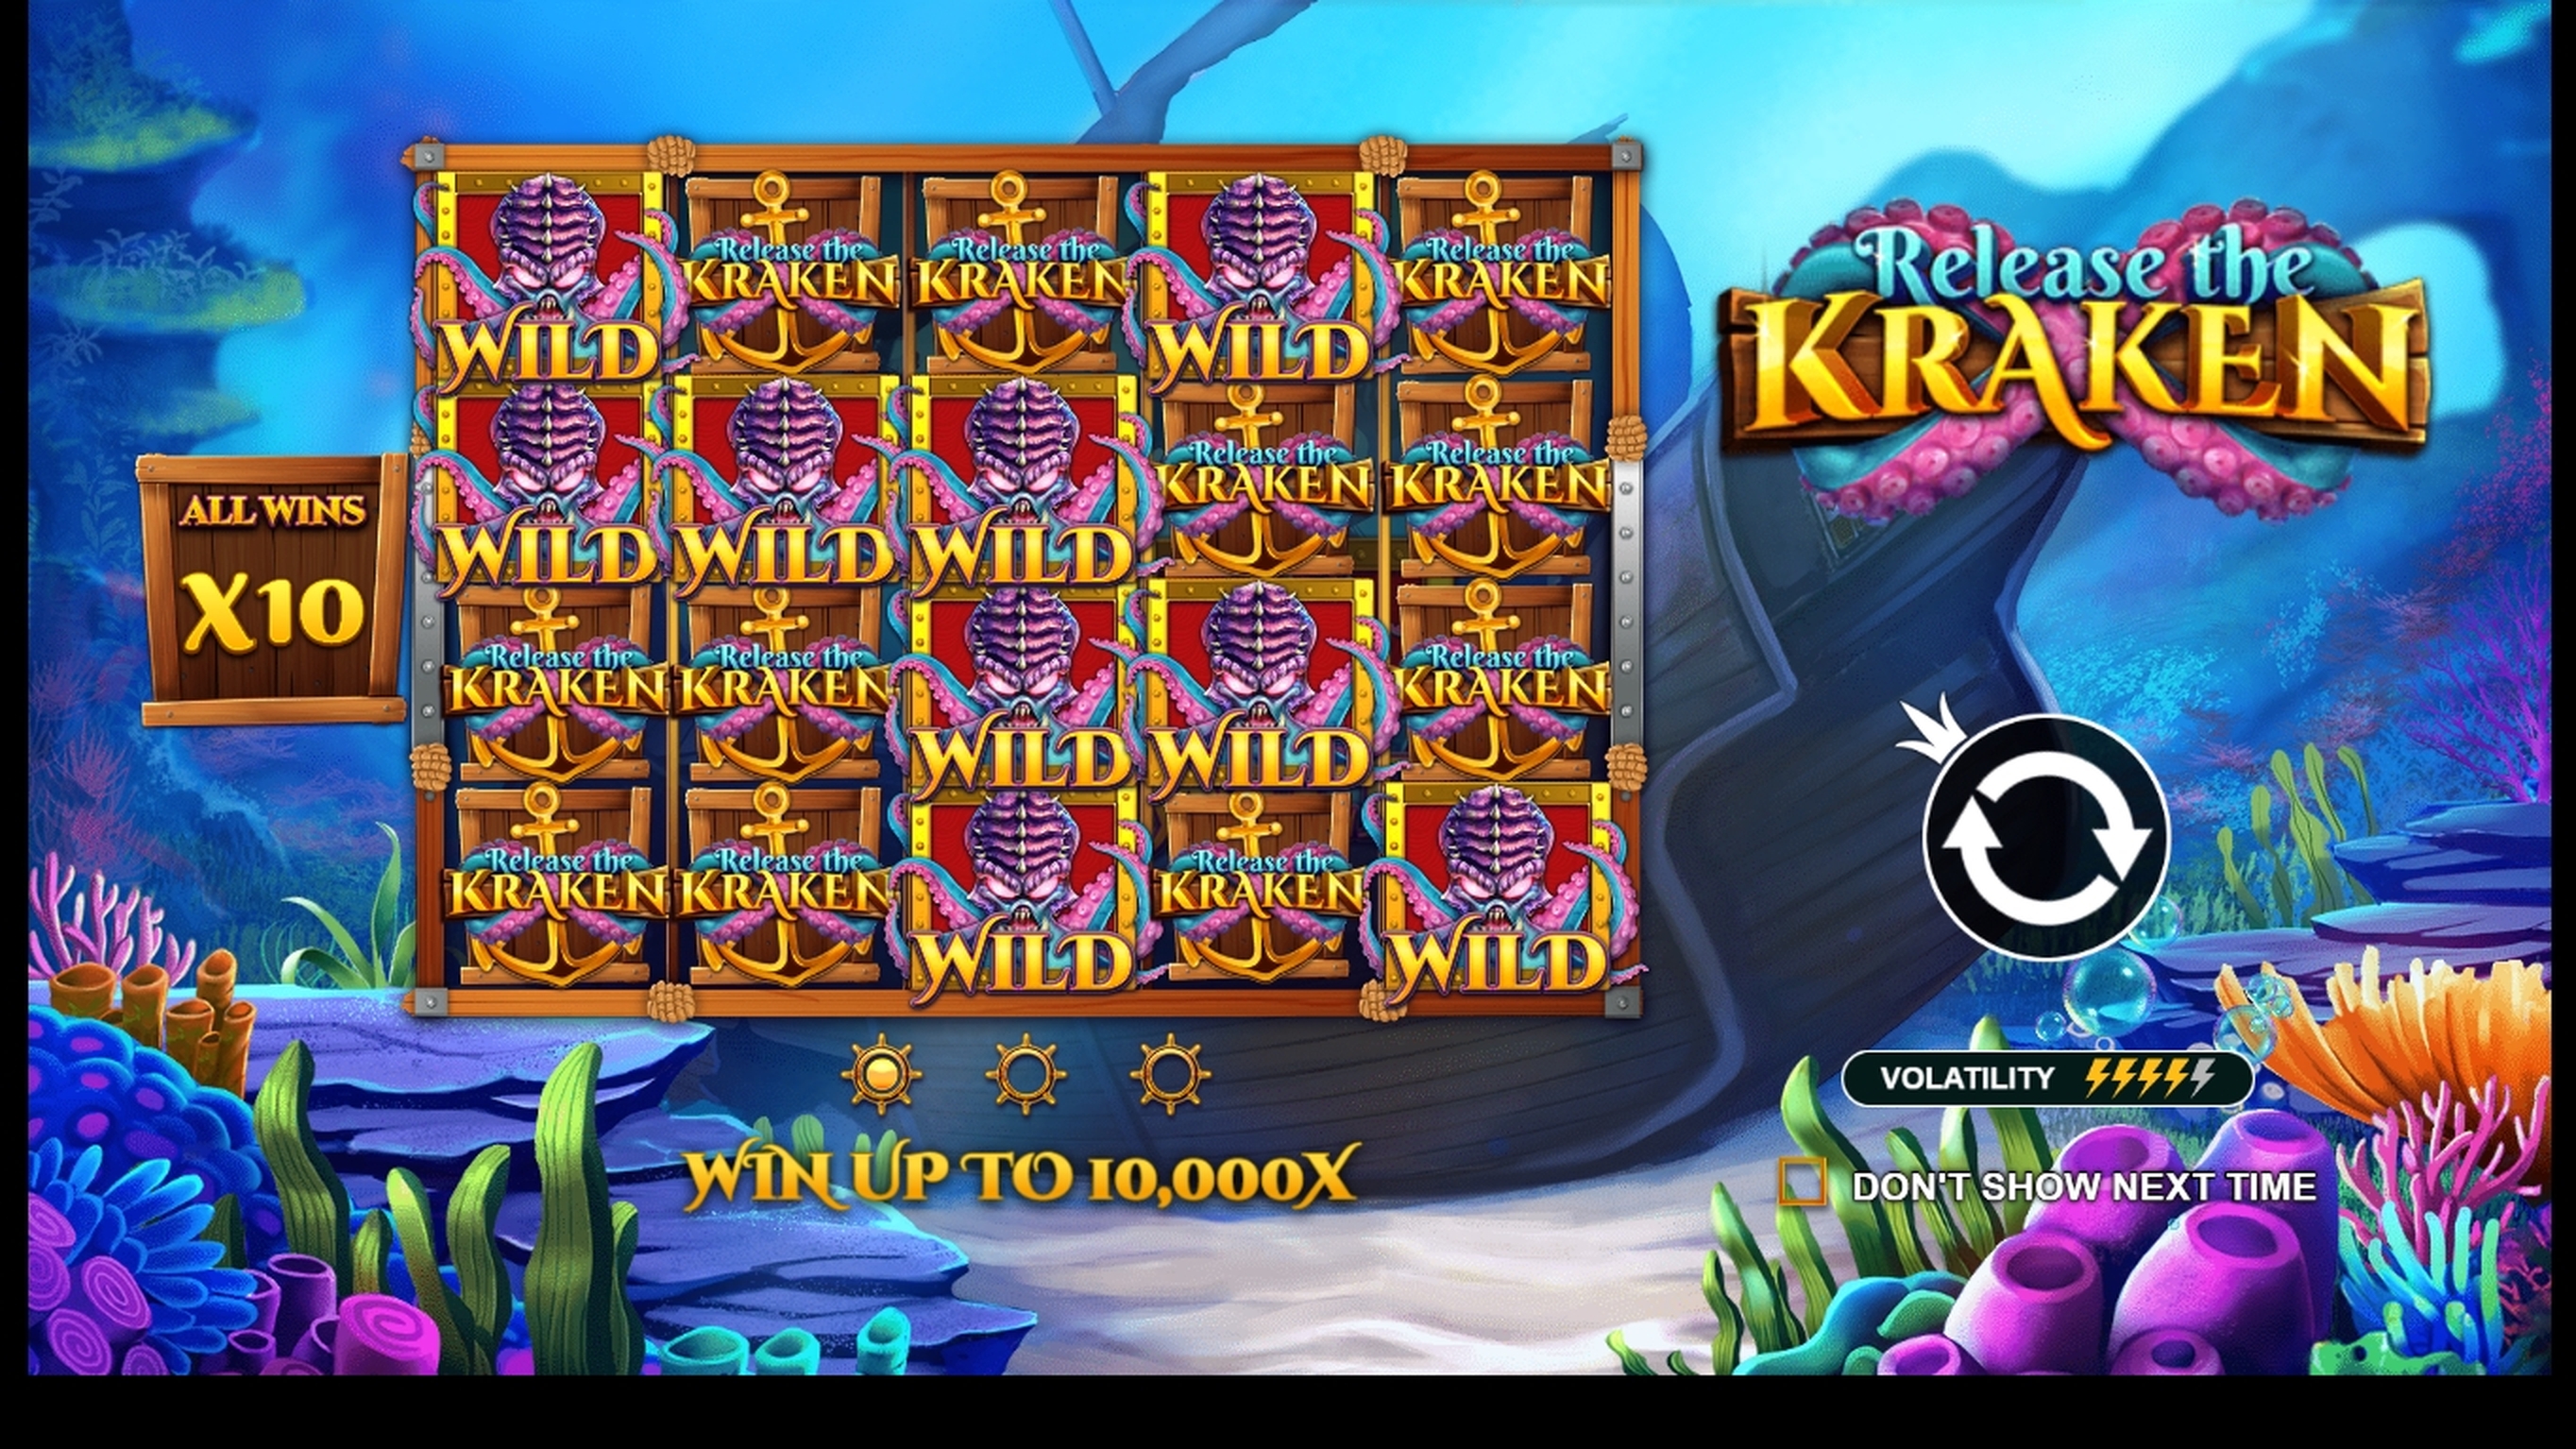 Play Release the Kraken Free Casino Slot Game by Cadillac Jack